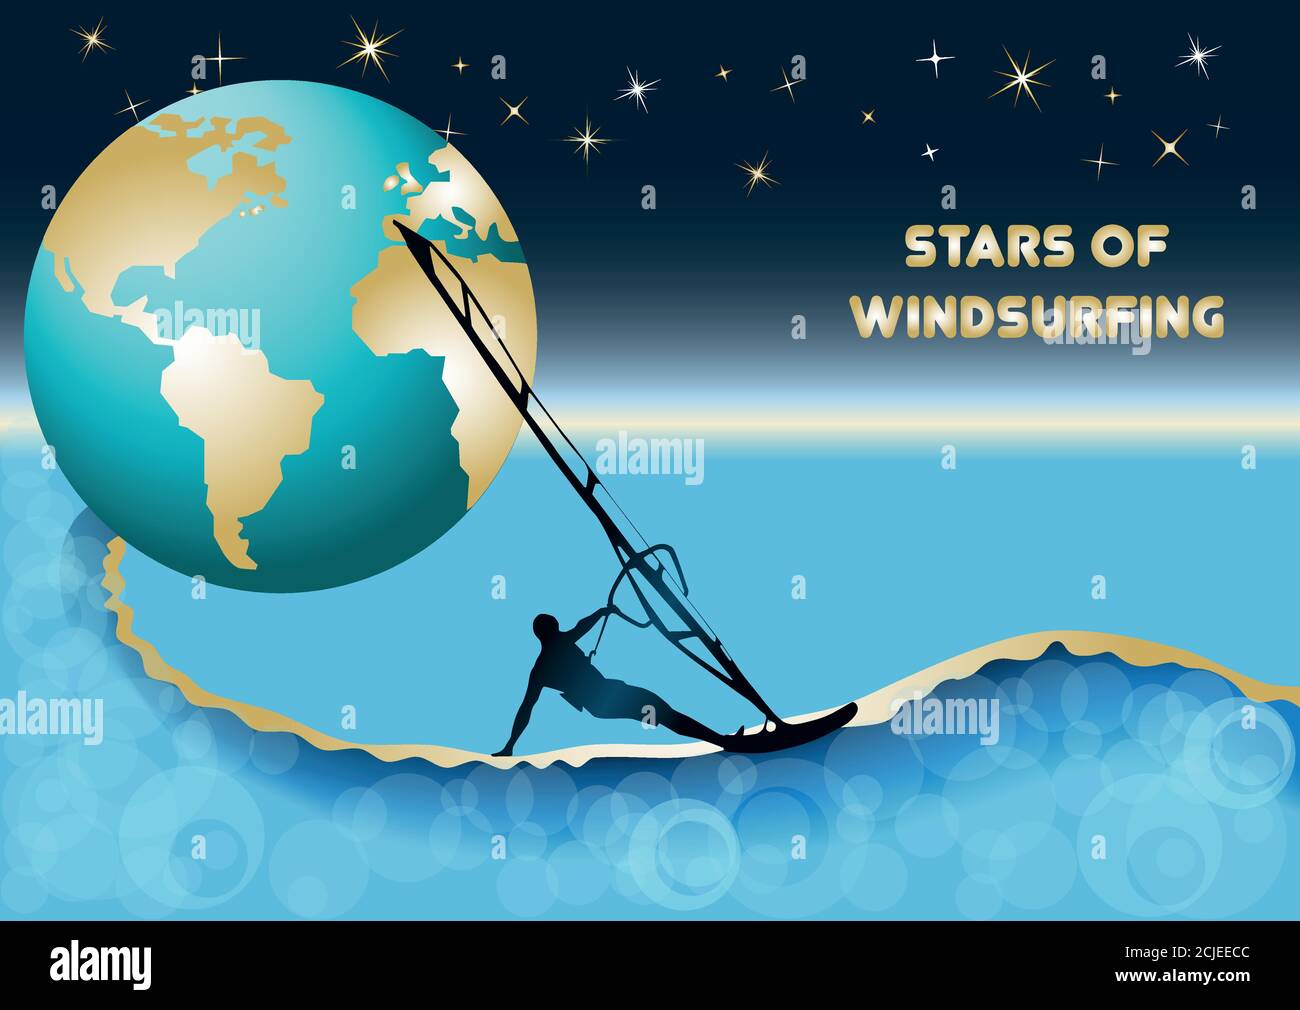 Vector illustration about windsurfing. Space Fantasy. Windsurfer ride a wave on a background of the starry sky and the Earth Stock Vector